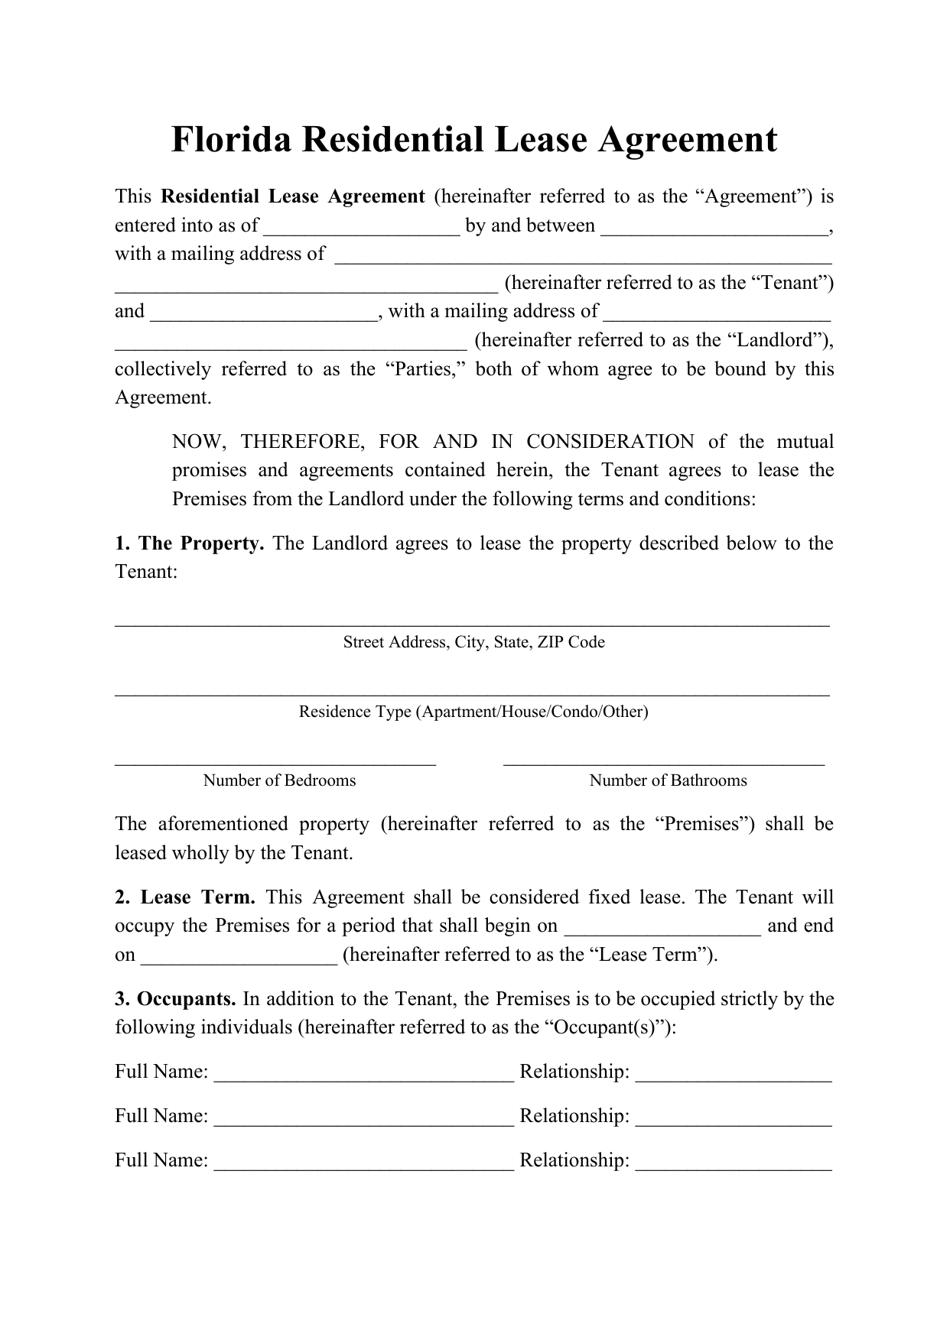 Florida Residential Lease Agreement Template Fill Out Sign Online And Download PDF